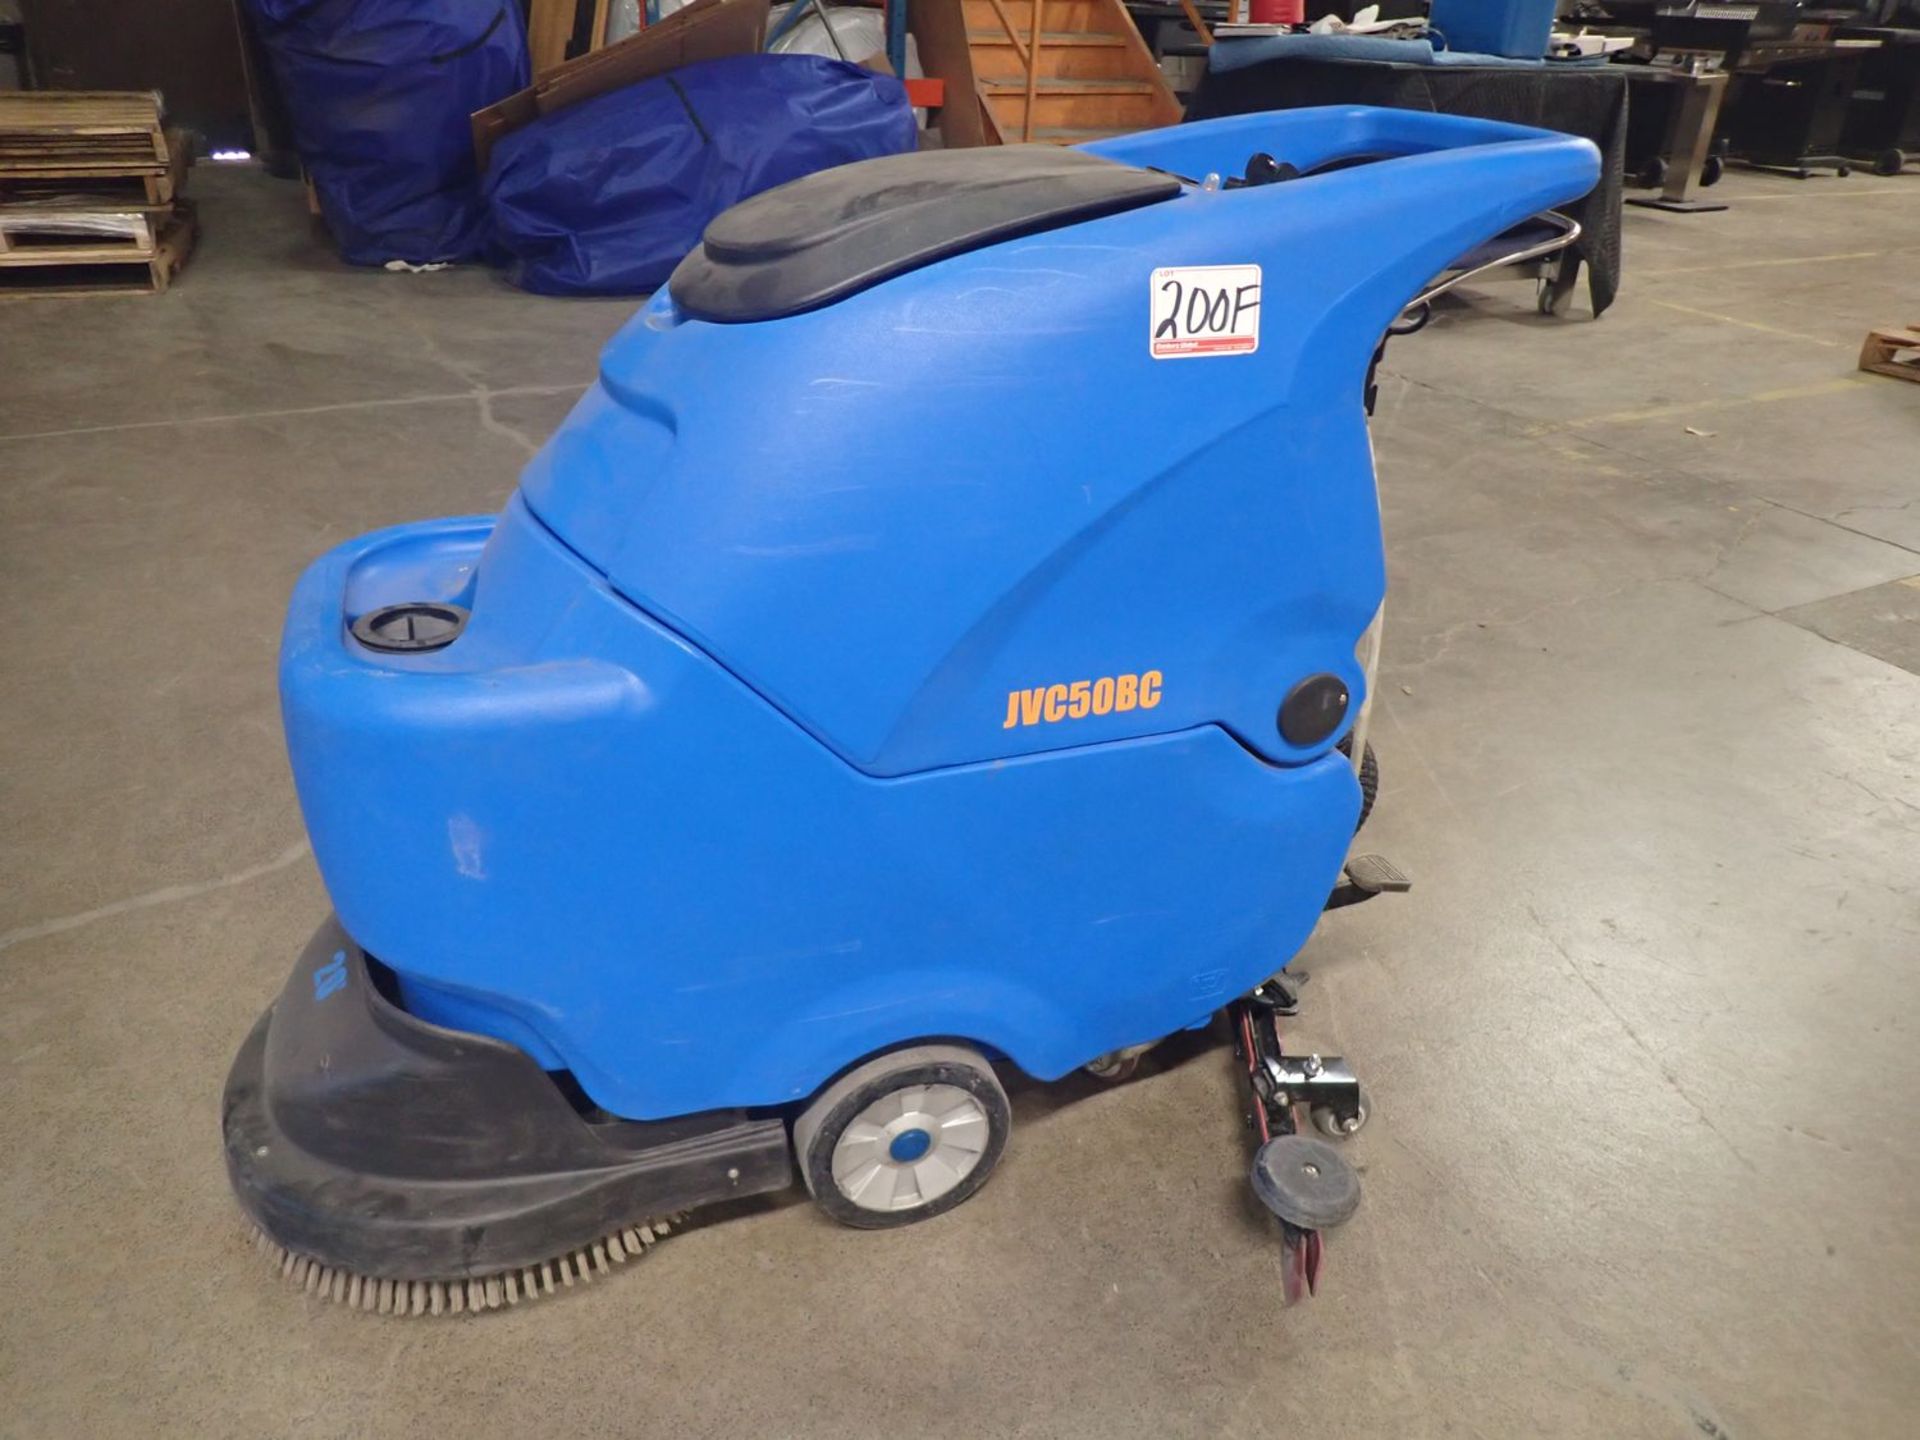 JOHNNY VAC JVC50BC 20" COMMERCIAL FLOOR CLEANER (NEEDS BATTERIES)